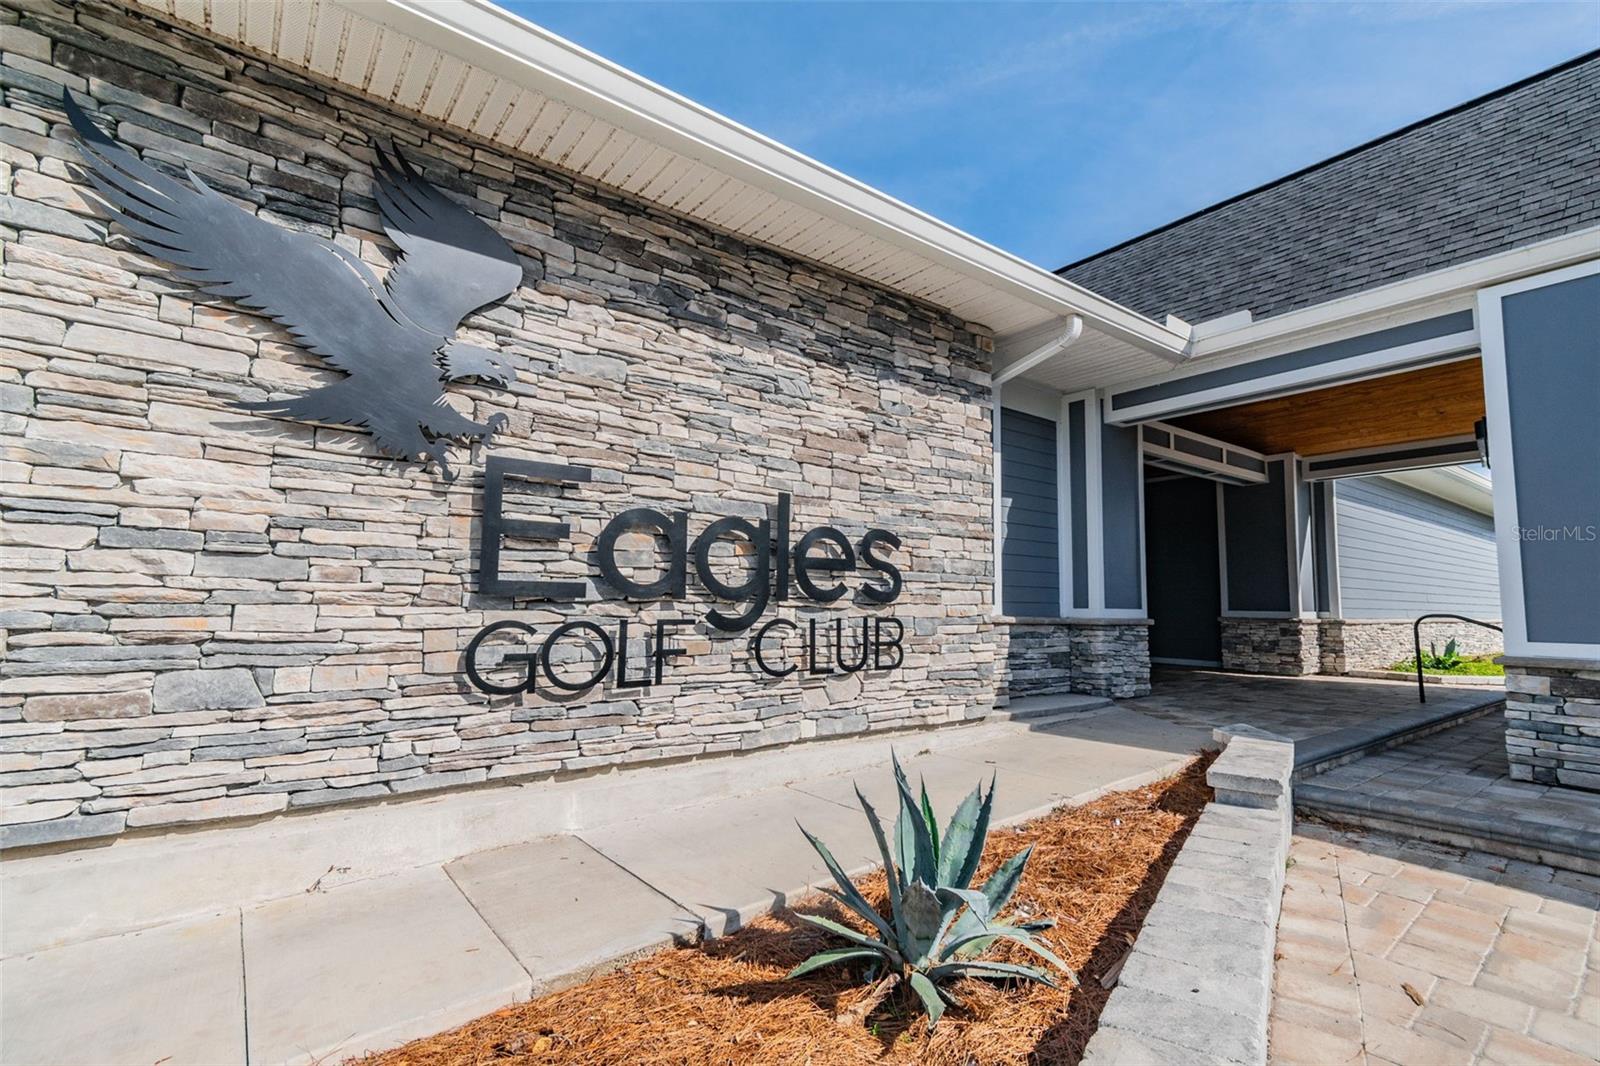 Entrance of The Eagles Club House